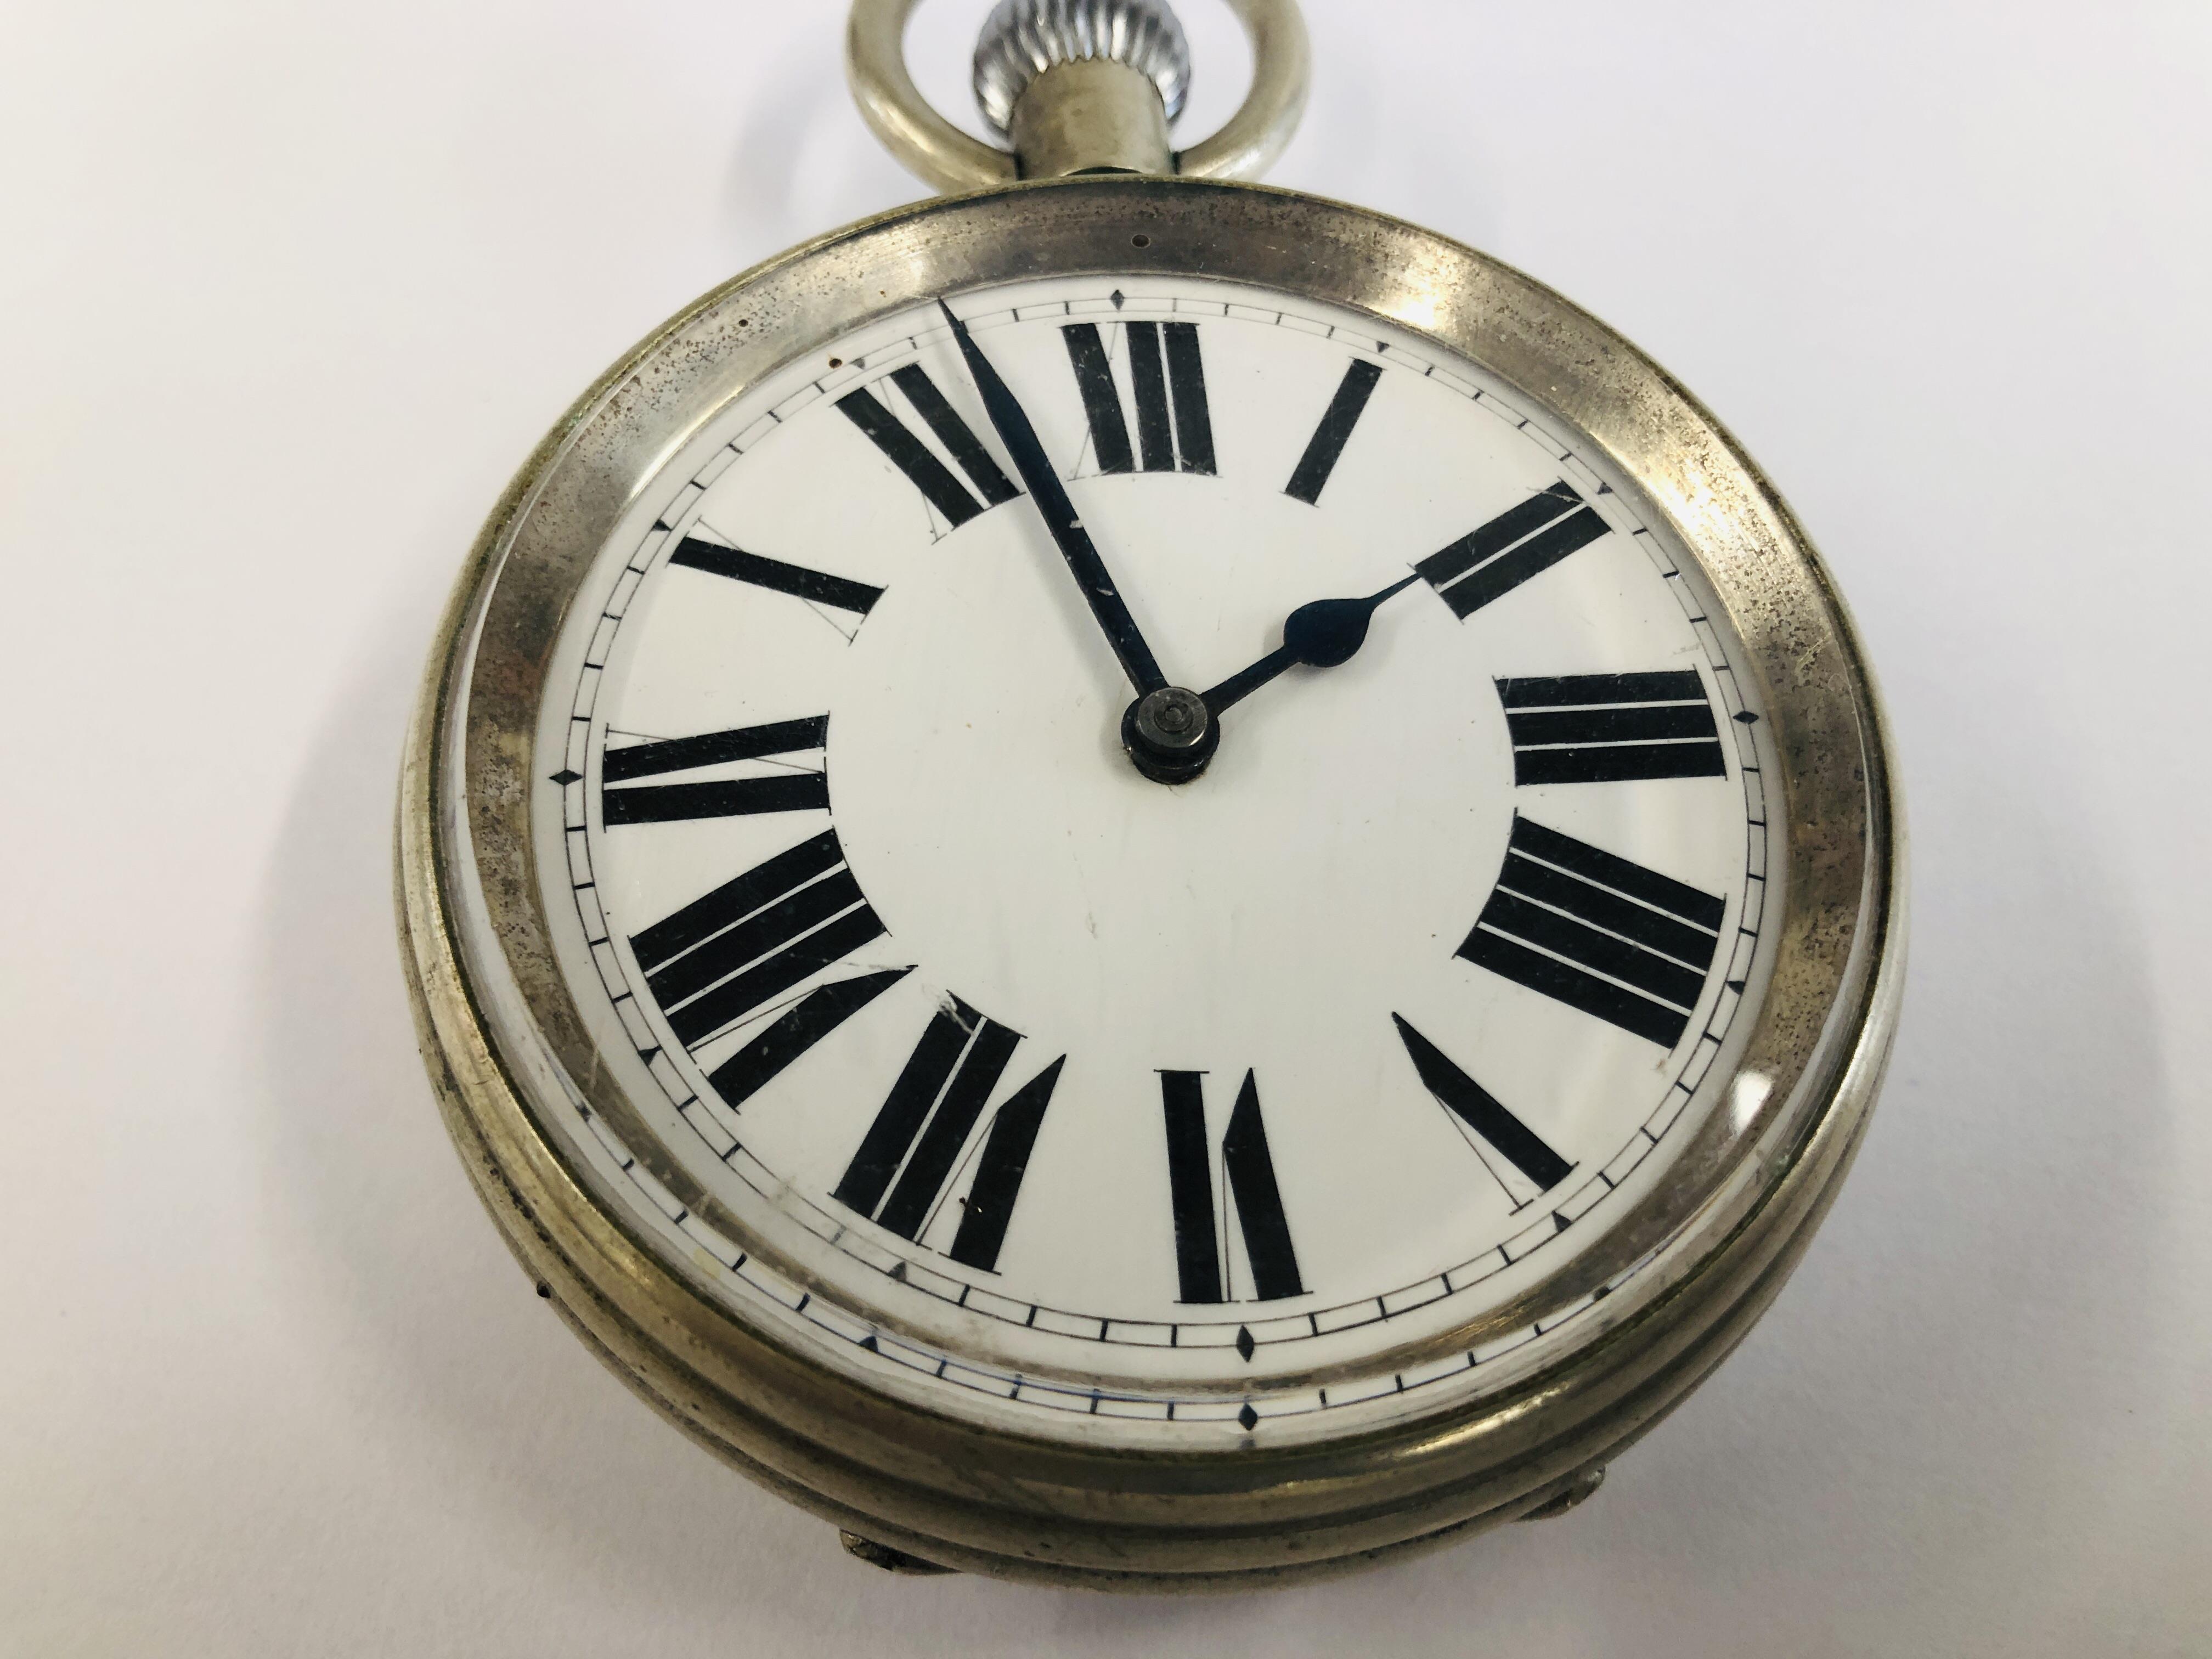 A LARGE STEEL CASED "THE ATLAS WATCH" POCKET WATCH. - Image 2 of 6